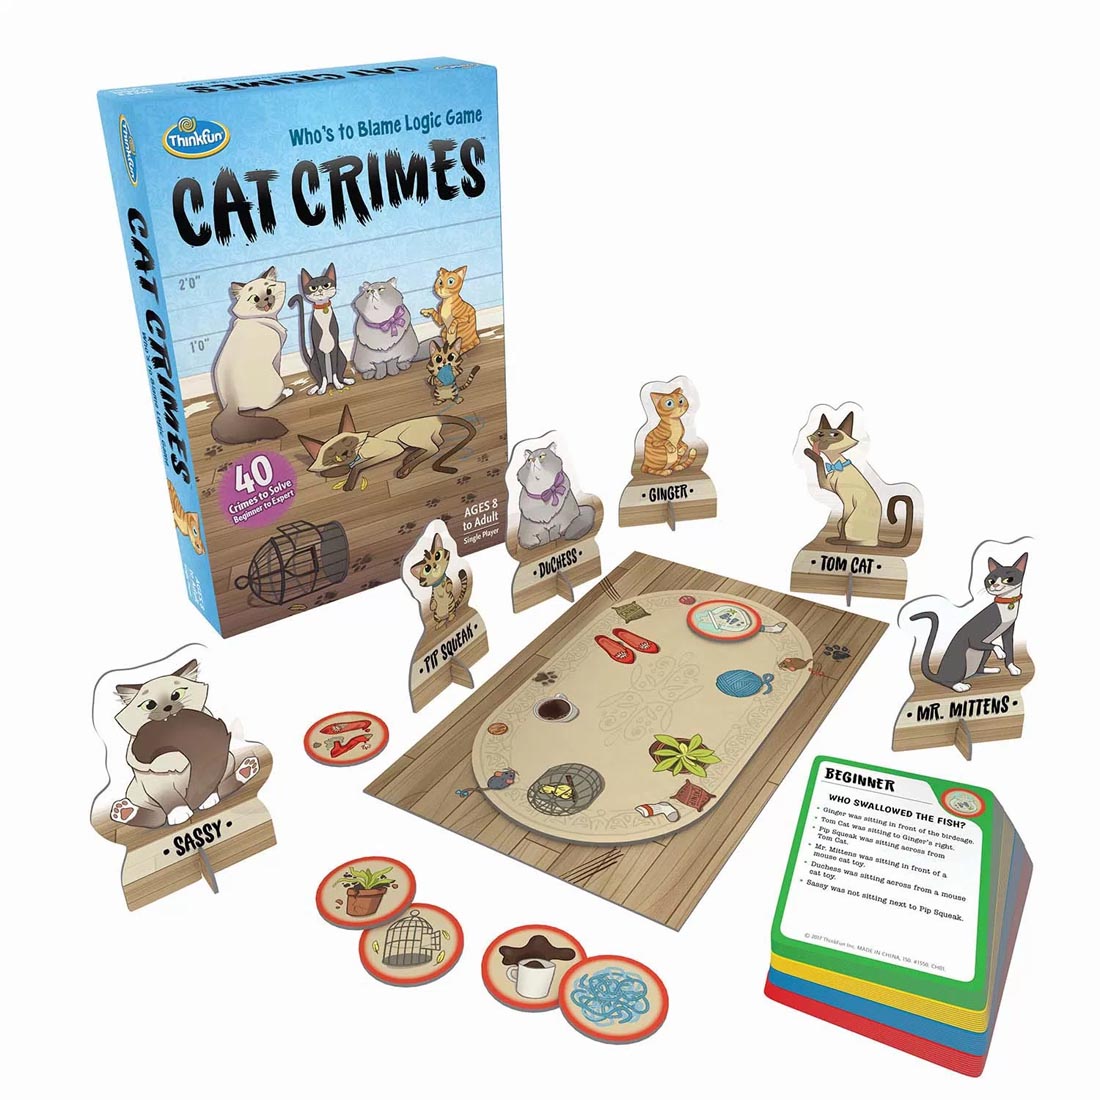 Thinkfun Cat Crimes: Who's To Blame Logic Game shown in use beside its package